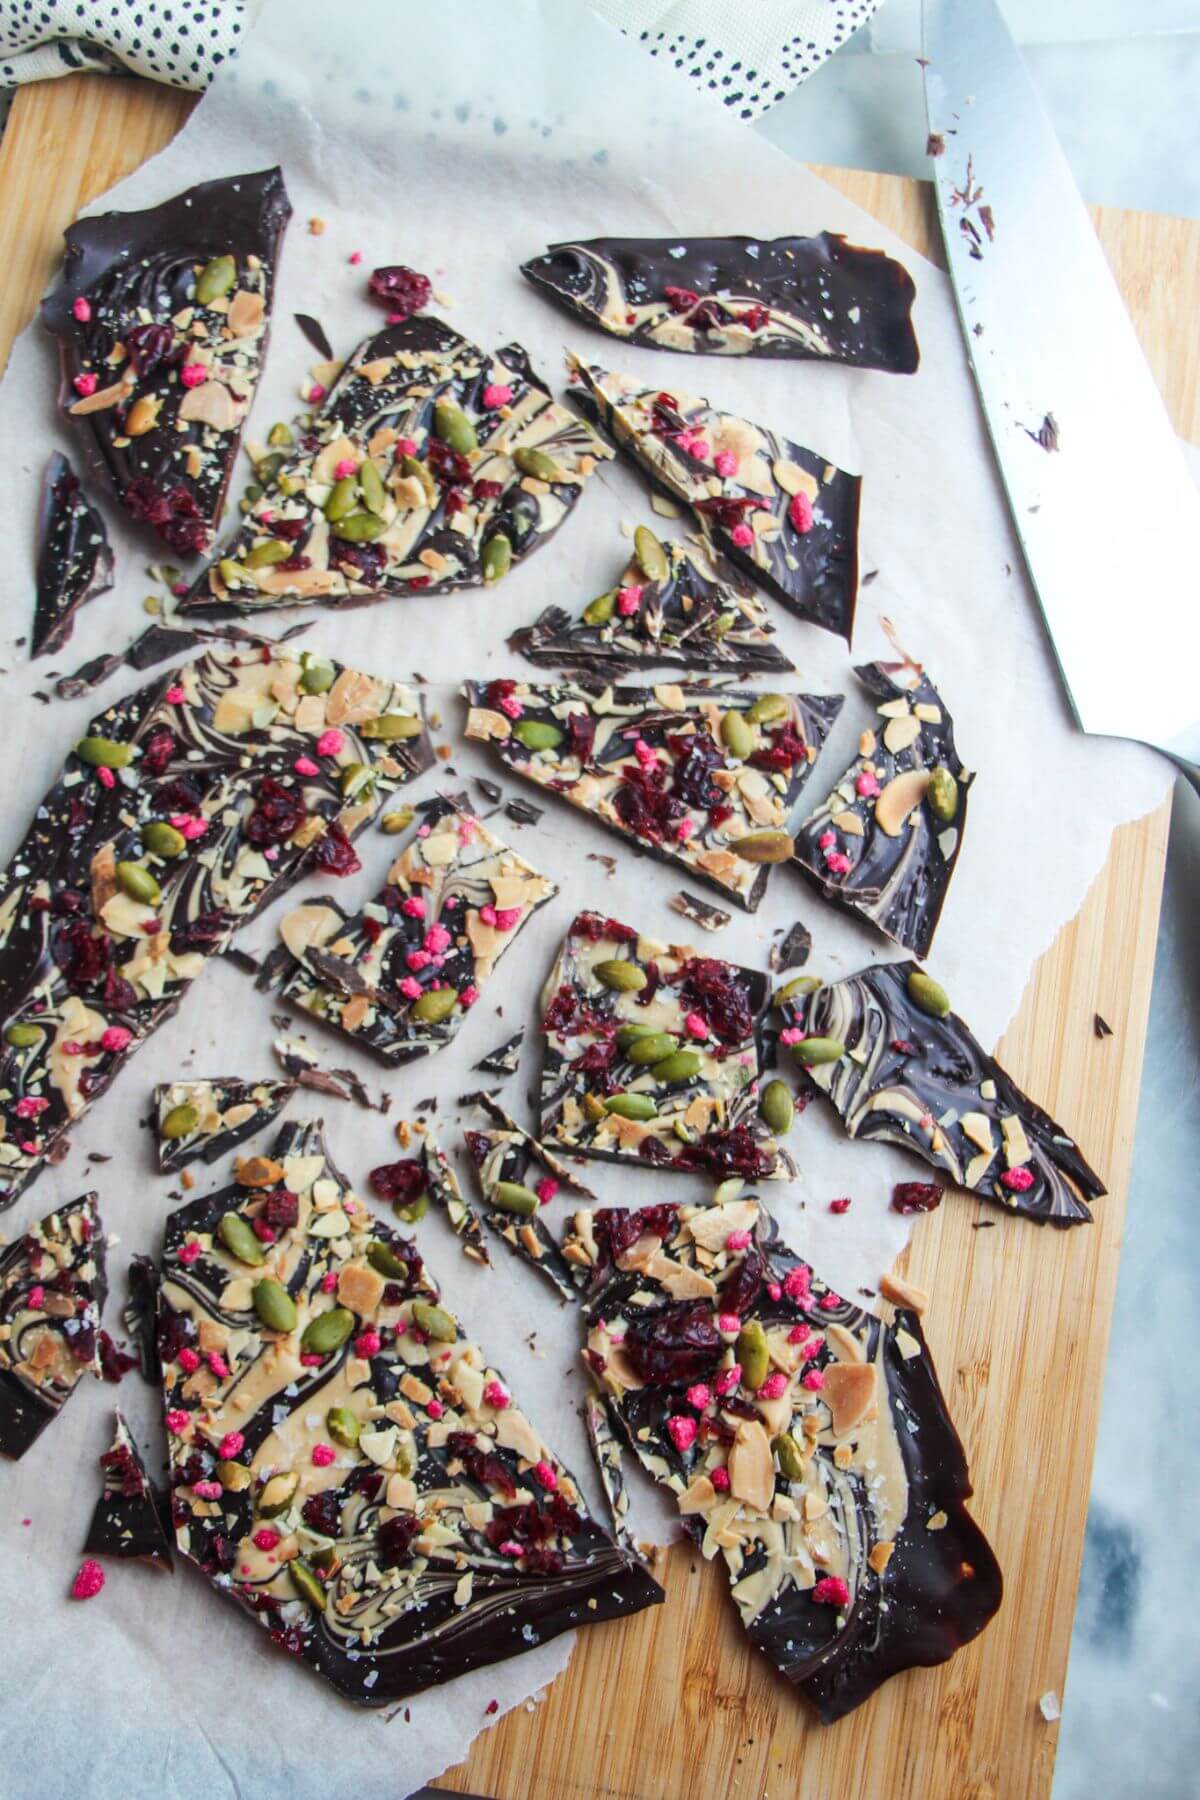 Chocolate almond bark broken into shards on a wooden board.